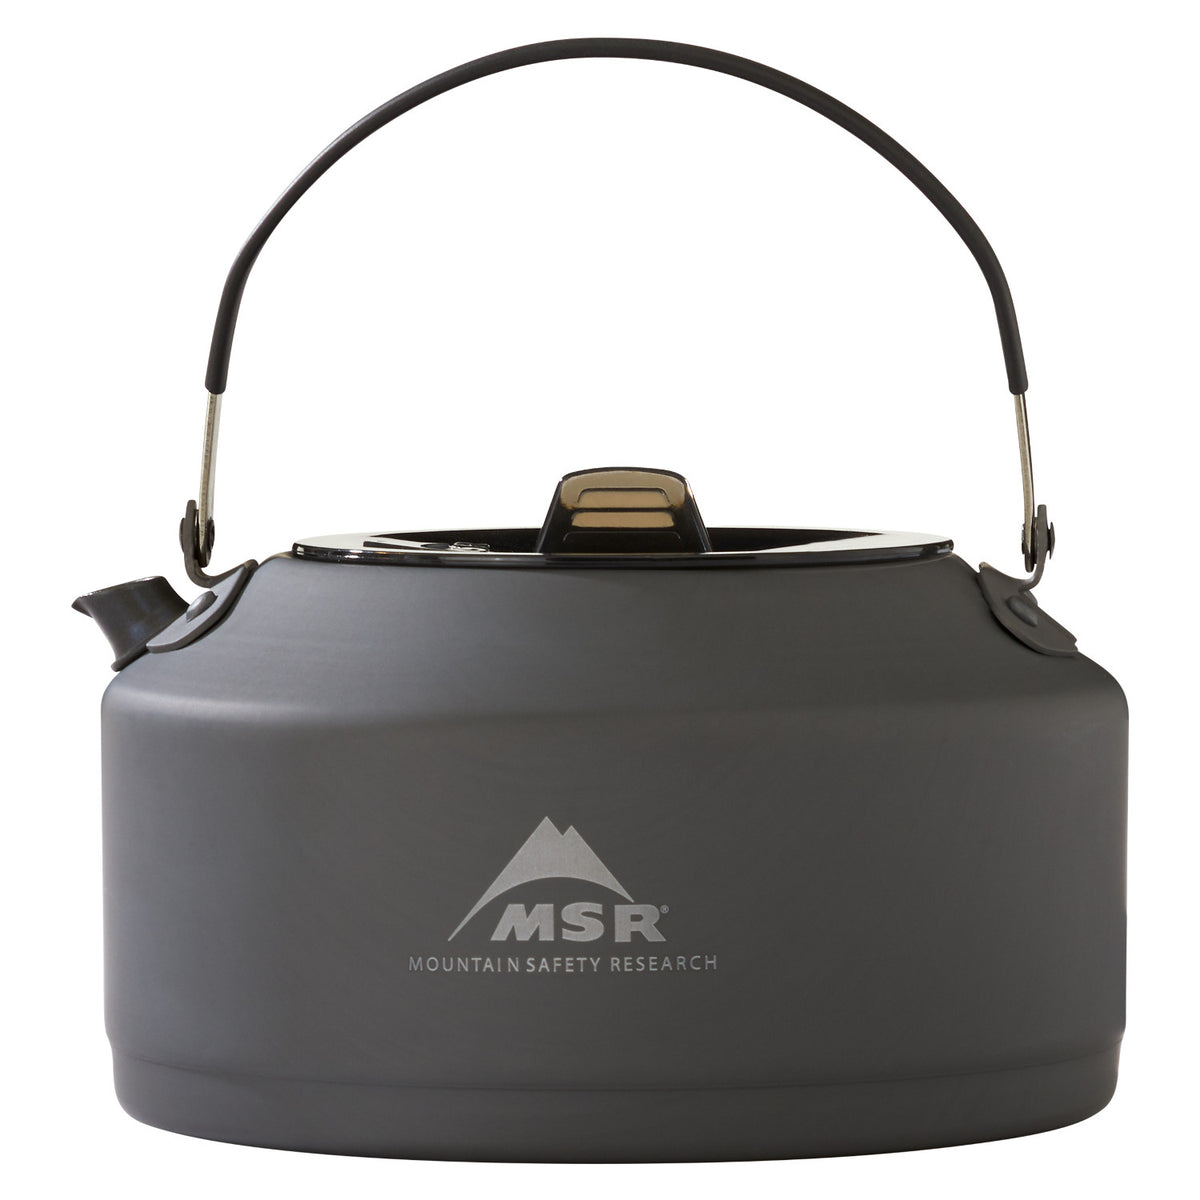 MSR Pika 1.0L Teapot, in dark grey colour with the handle upright